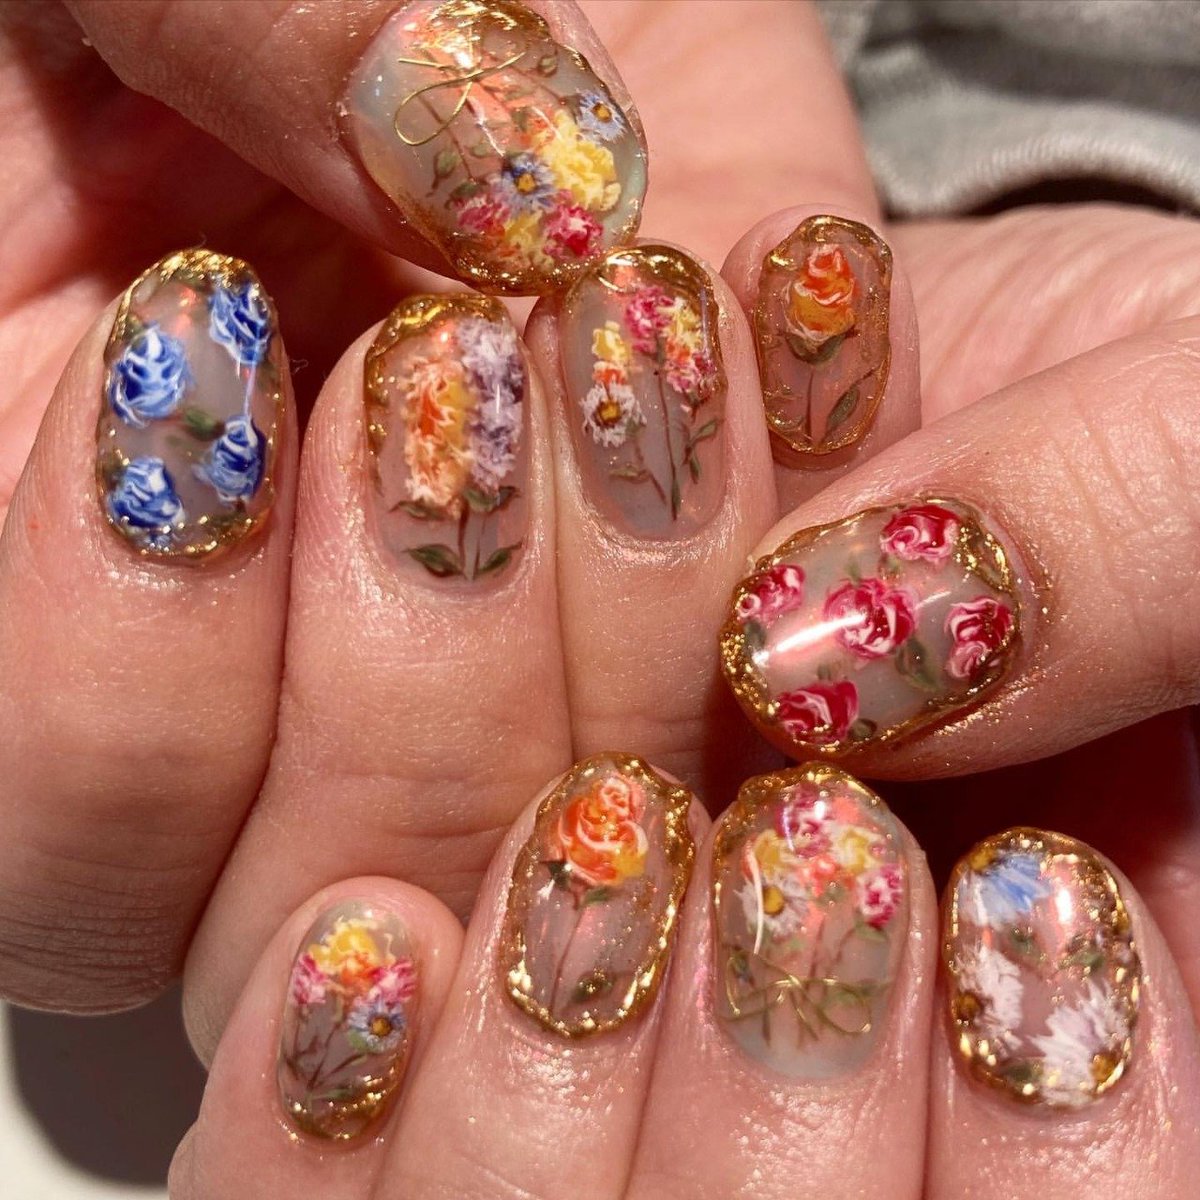 dried flower nails 🌺